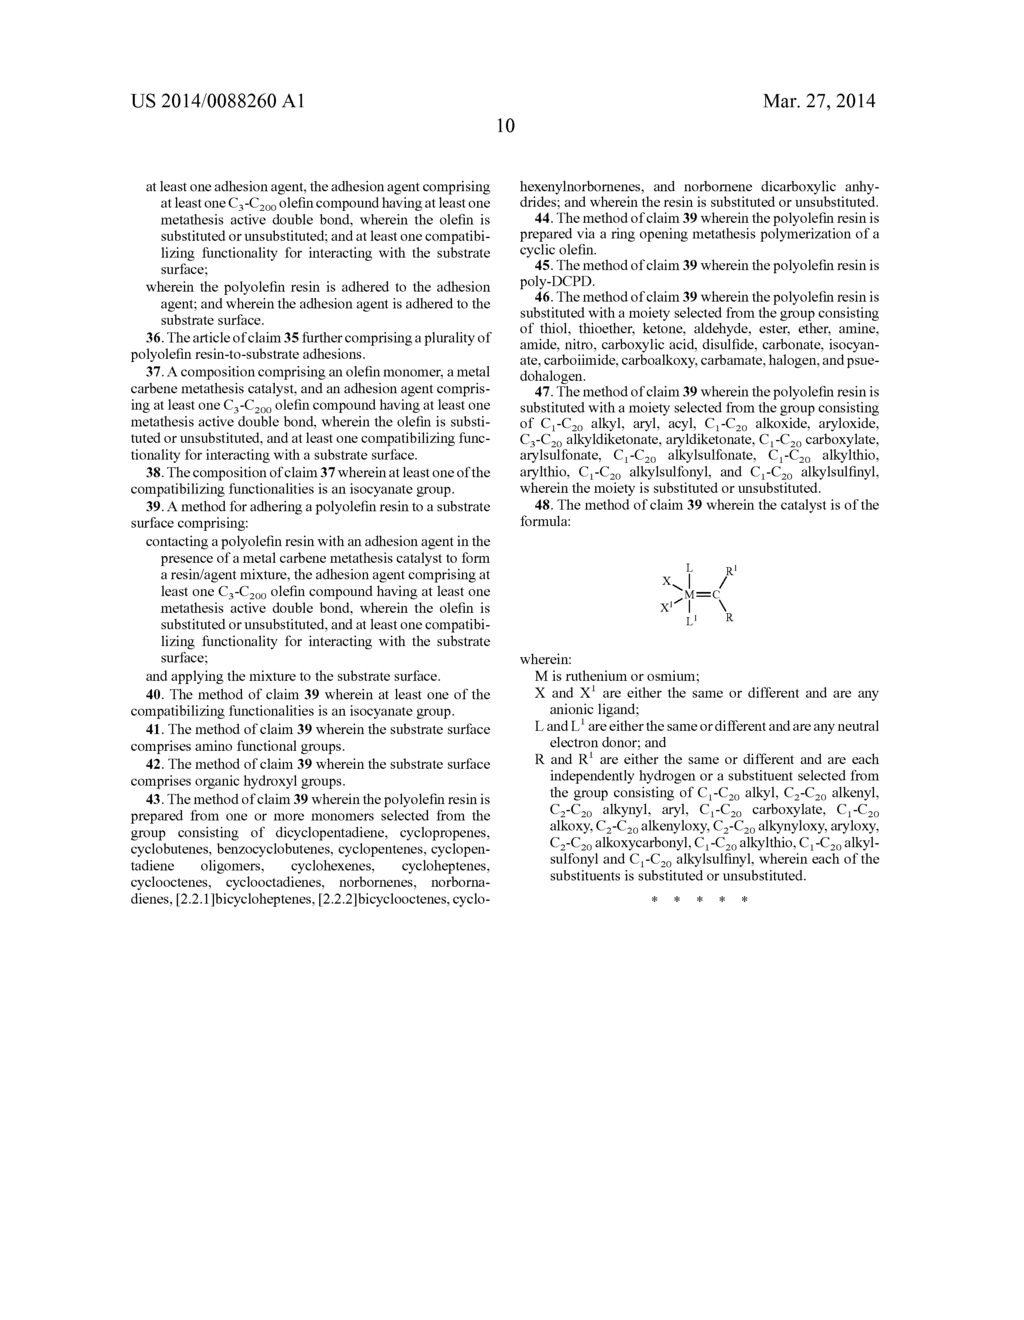 METATHESIS-ACTIVE ADHESION AGENTS AND METHODS FOR ENHANCING POLYMER     ADHESION TO SURFACES - diagram, schematic, and image 11